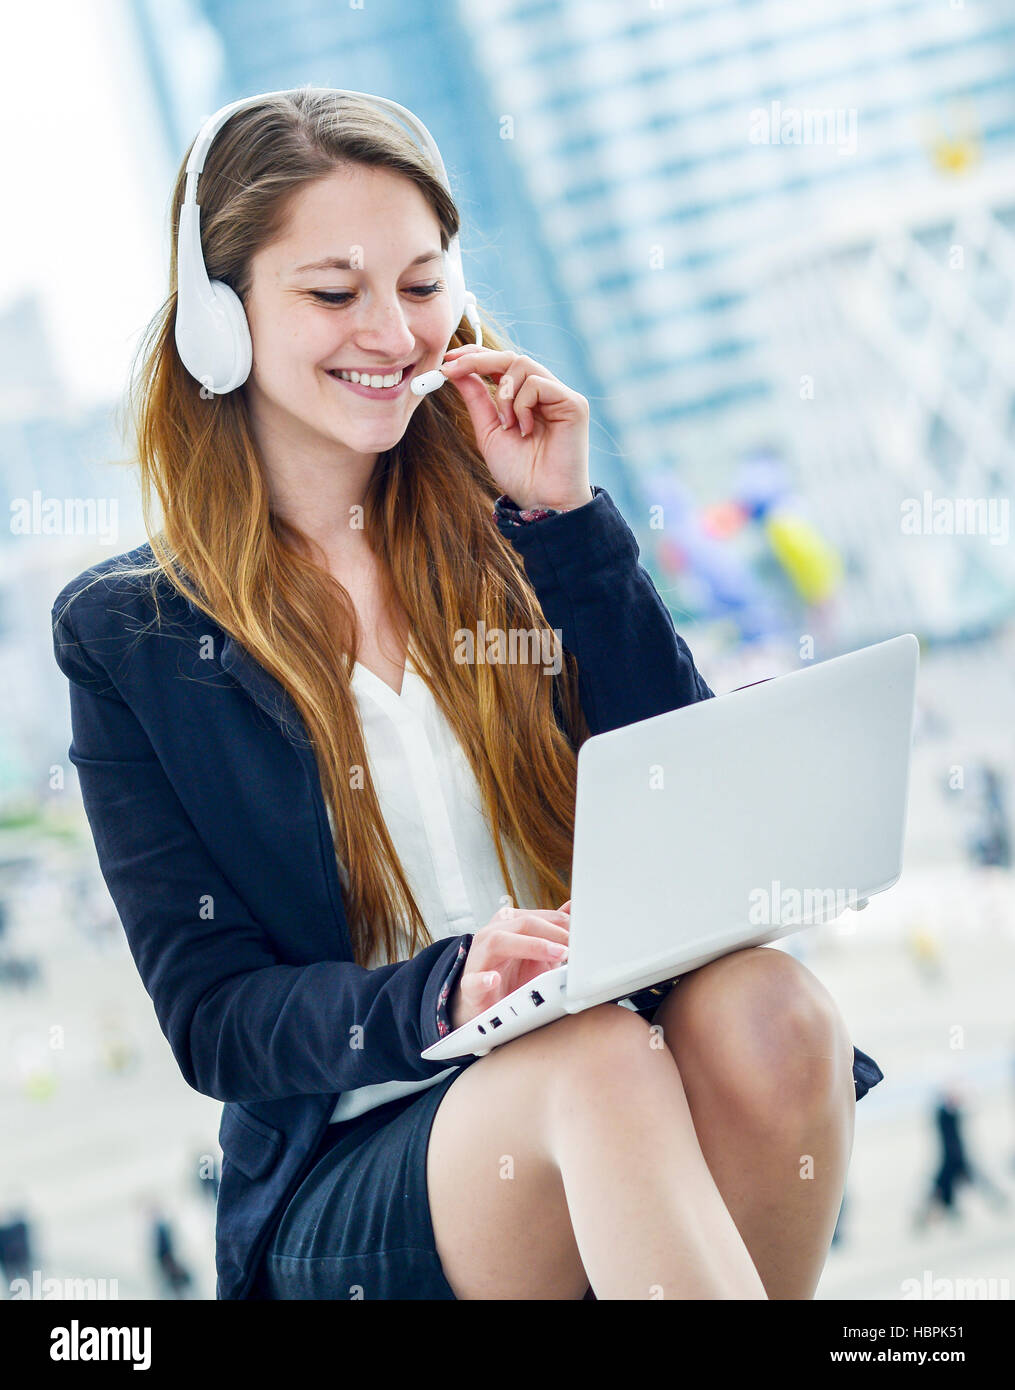 Blonde support operator in headset outdoor Stock Photo